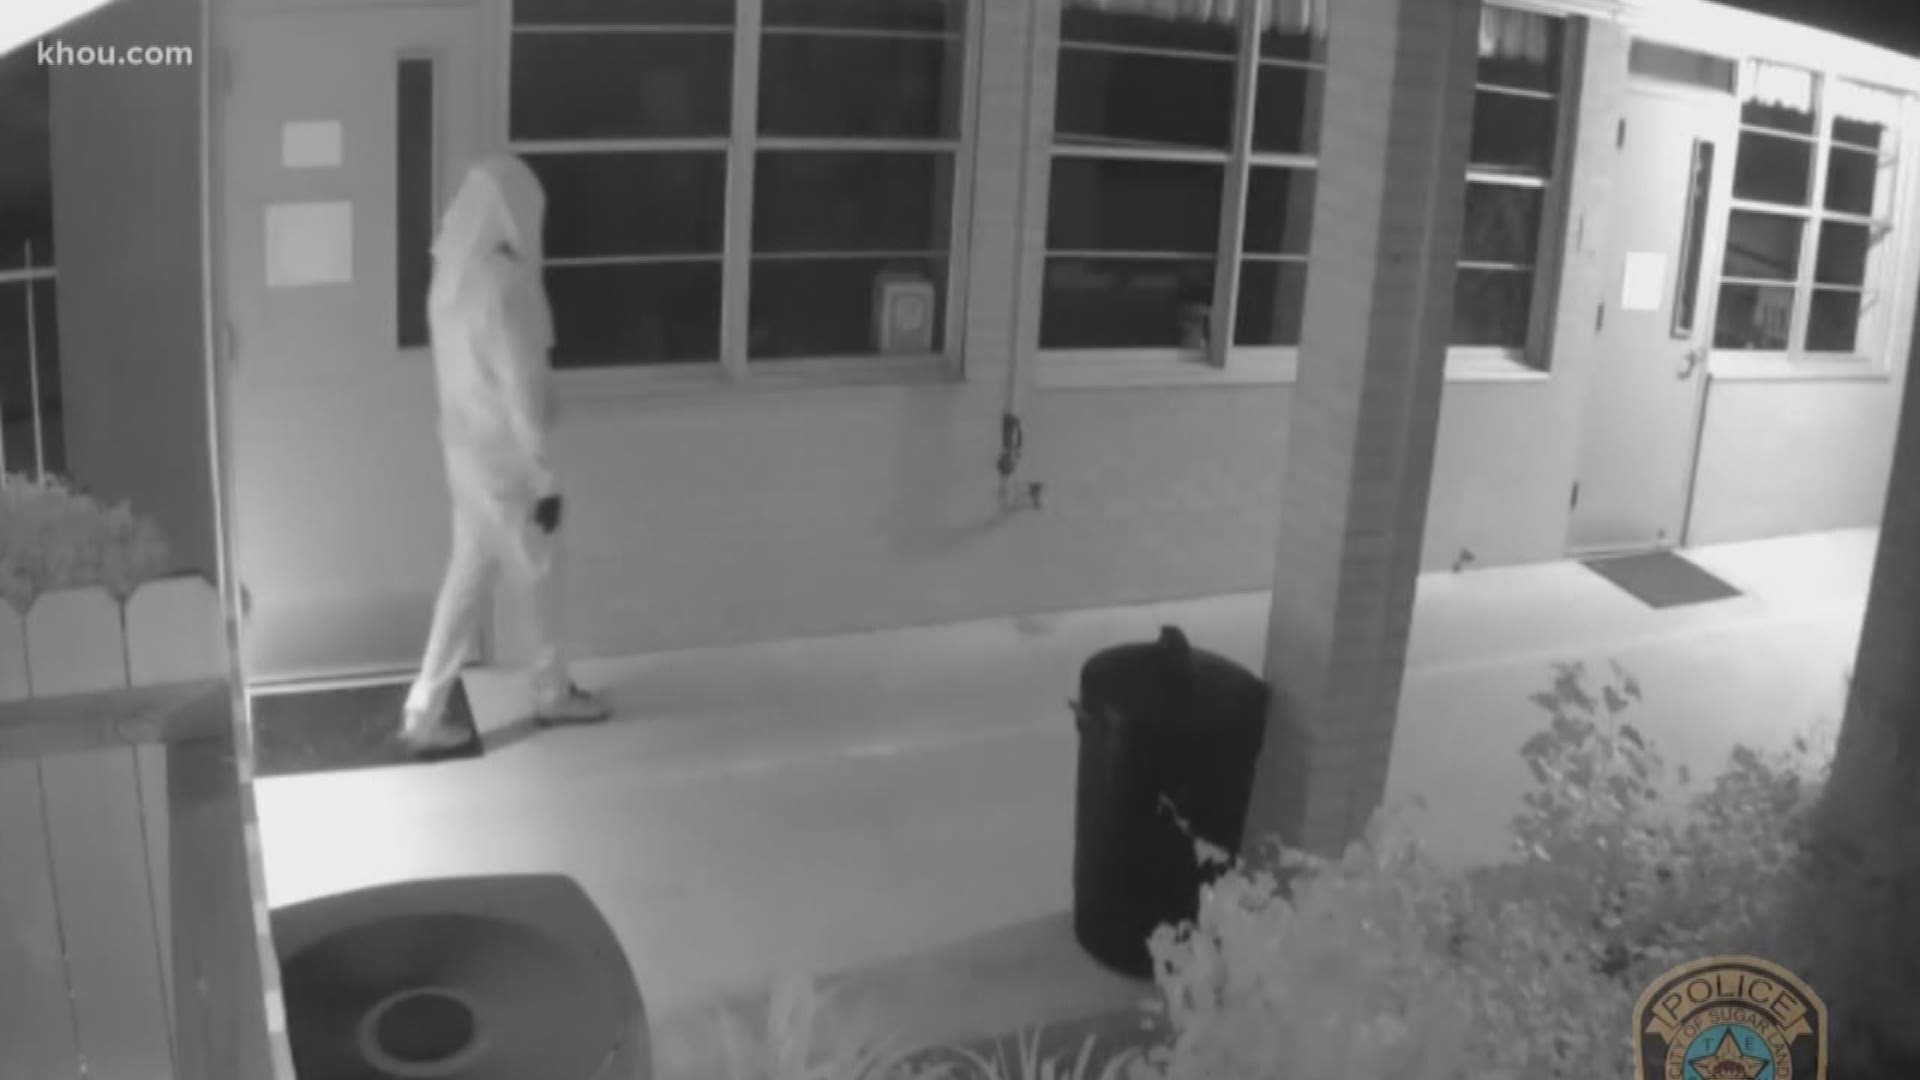 Sugar Land police are looking for a man involved in burglaries at three local churches.